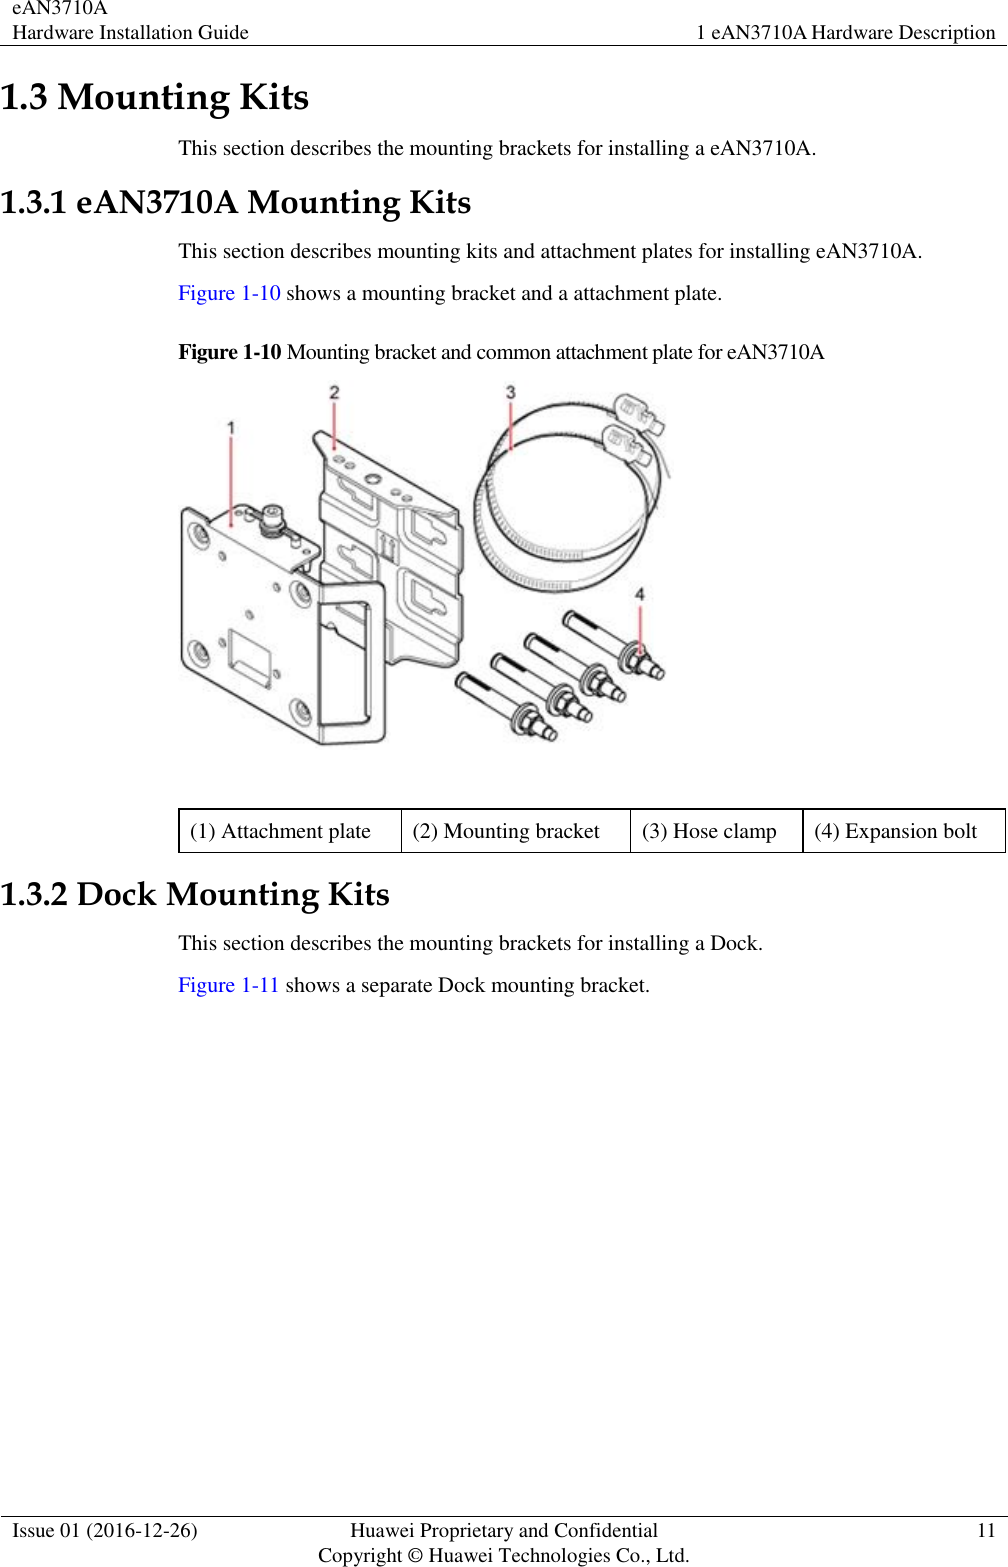 eAN3710A Hardware Installation Guide 1 eAN3710A Hardware Description  Issue 01 (2016-12-26) Huawei Proprietary and Confidential                                     Copyright © Huawei Technologies Co., Ltd. 11  1.3 Mounting Kits This section describes the mounting brackets for installing a eAN3710A. 1.3.1 eAN3710A Mounting Kits This section describes mounting kits and attachment plates for installing eAN3710A. Figure 1-10 shows a mounting bracket and a attachment plate. Figure 1-10 Mounting bracket and common attachment plate for eAN3710A   (1) Attachment plate (2) Mounting bracket (3) Hose clamp (4) Expansion bolt 1.3.2 Dock Mounting Kits This section describes the mounting brackets for installing a Dock. Figure 1-11 shows a separate Dock mounting bracket. 